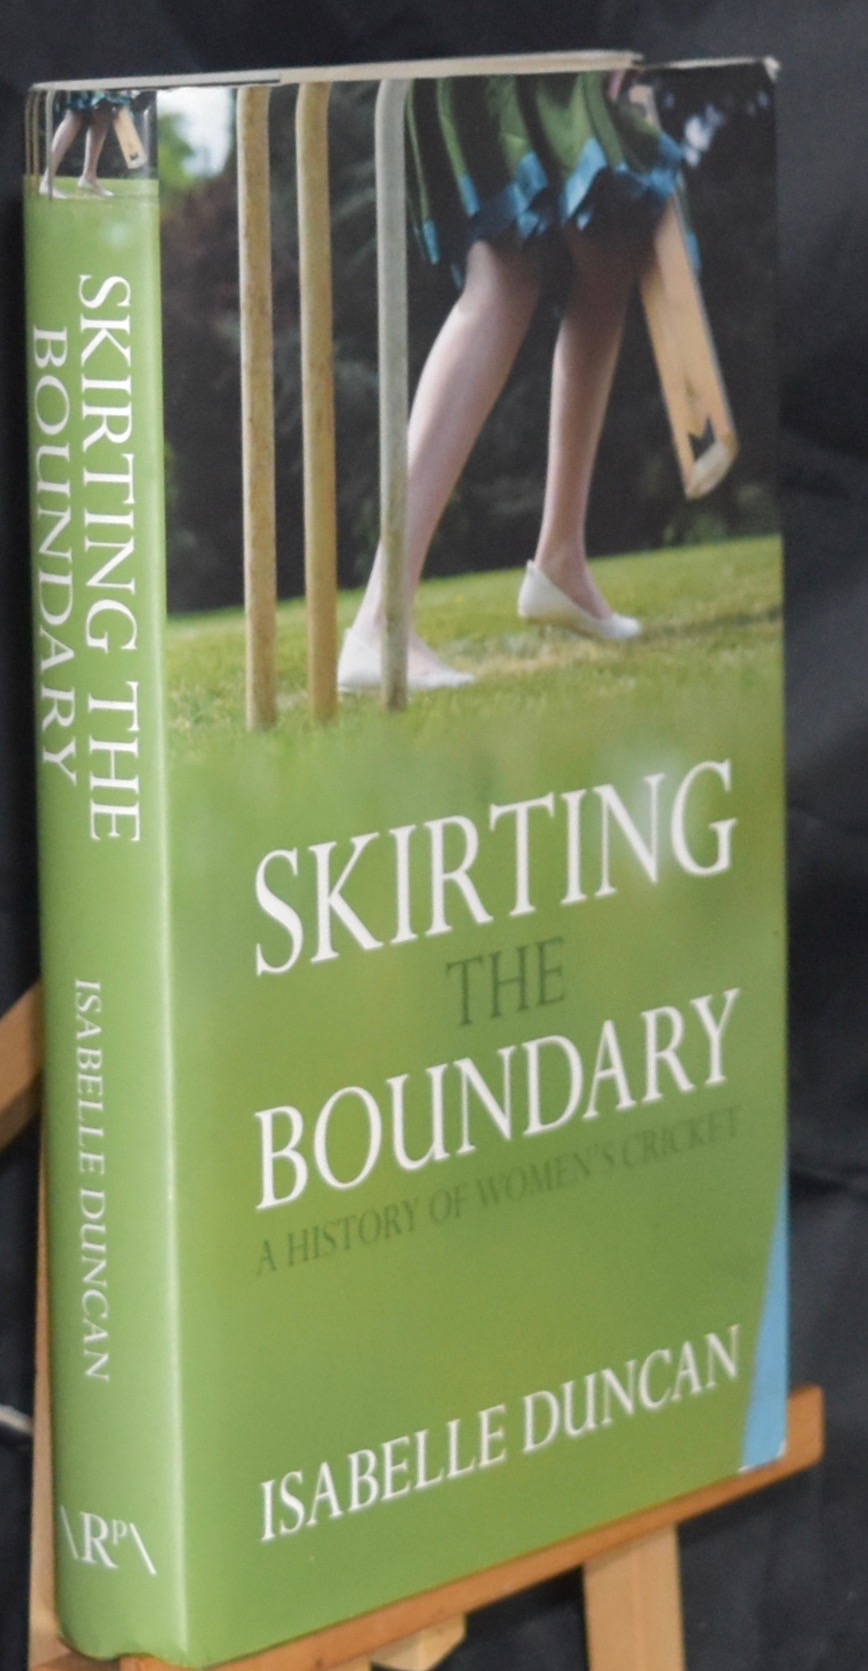 Skirting The Boundary: A History of Women's Cricket. First Printing. Signed by the Author - Duncan, Isabelle